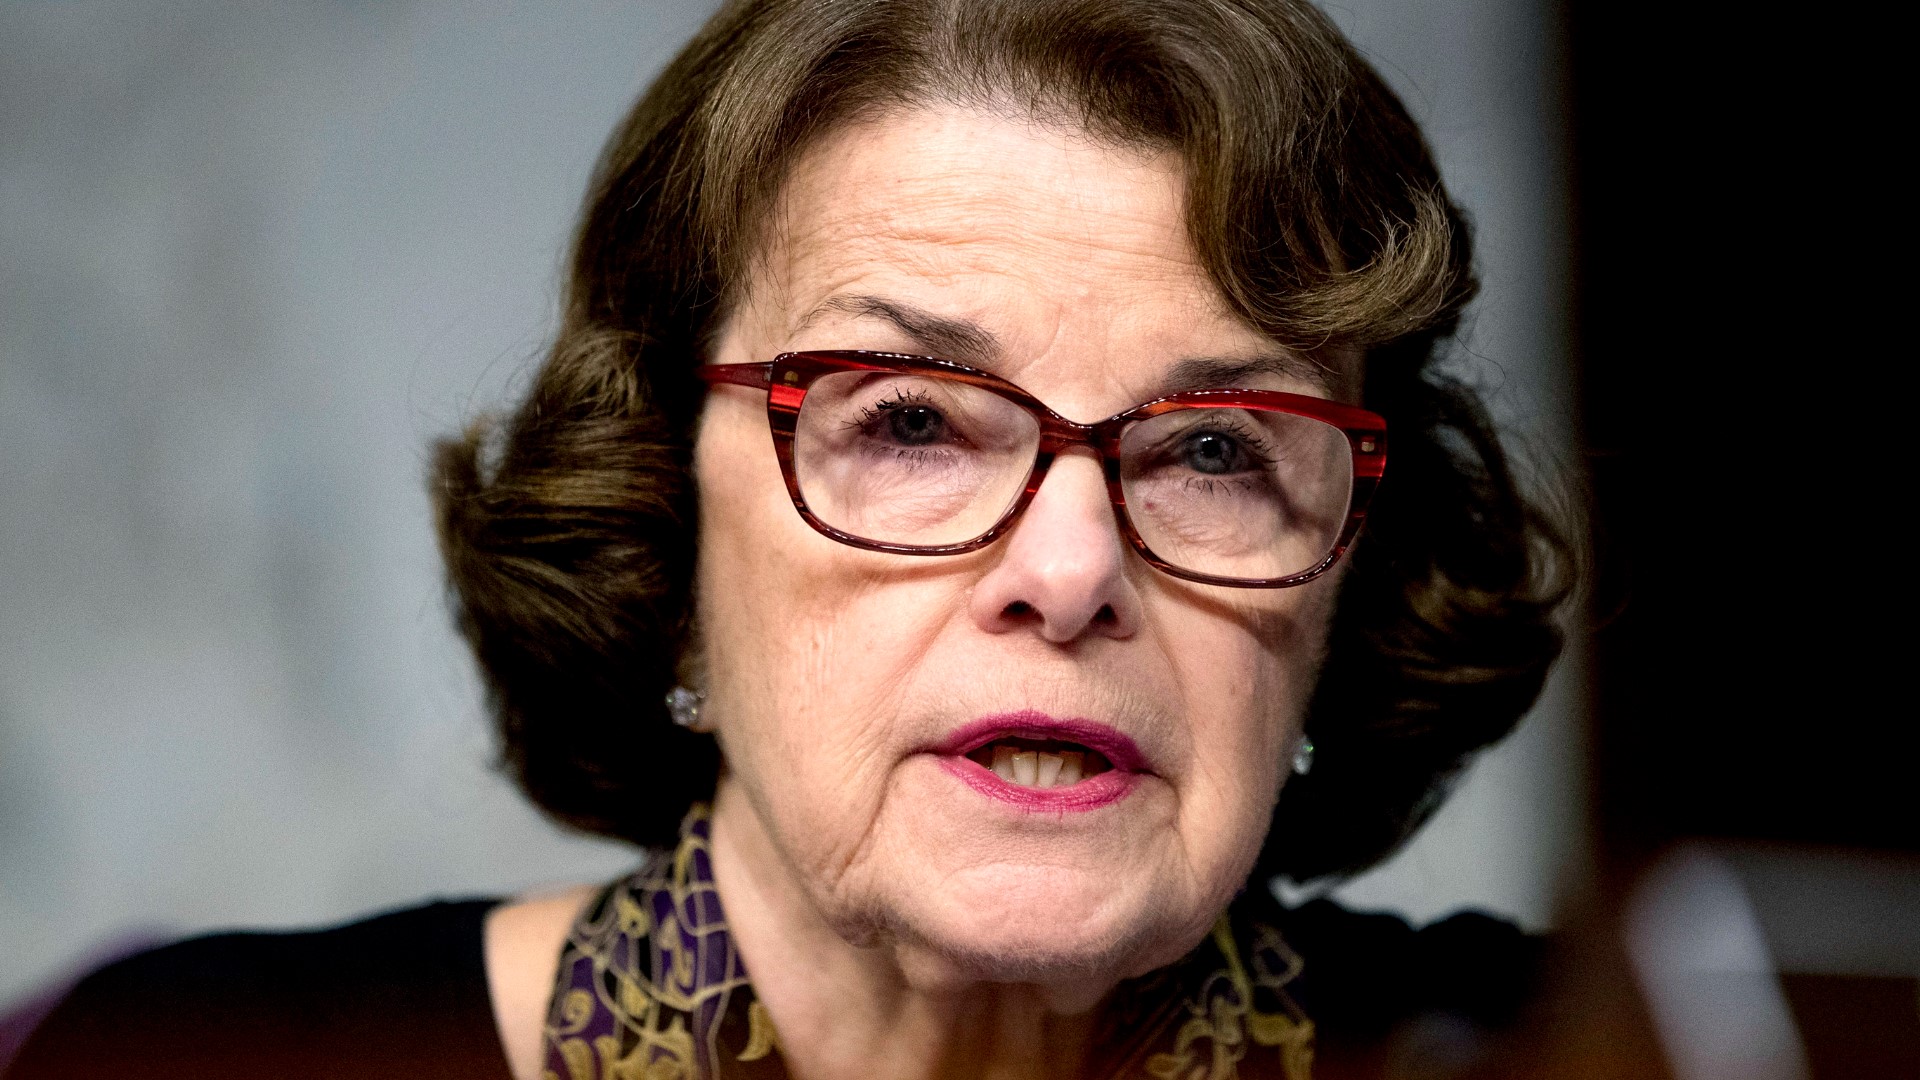 Over her long career, Senator Dianne Feinstein broke the glass ceiling time and time again.